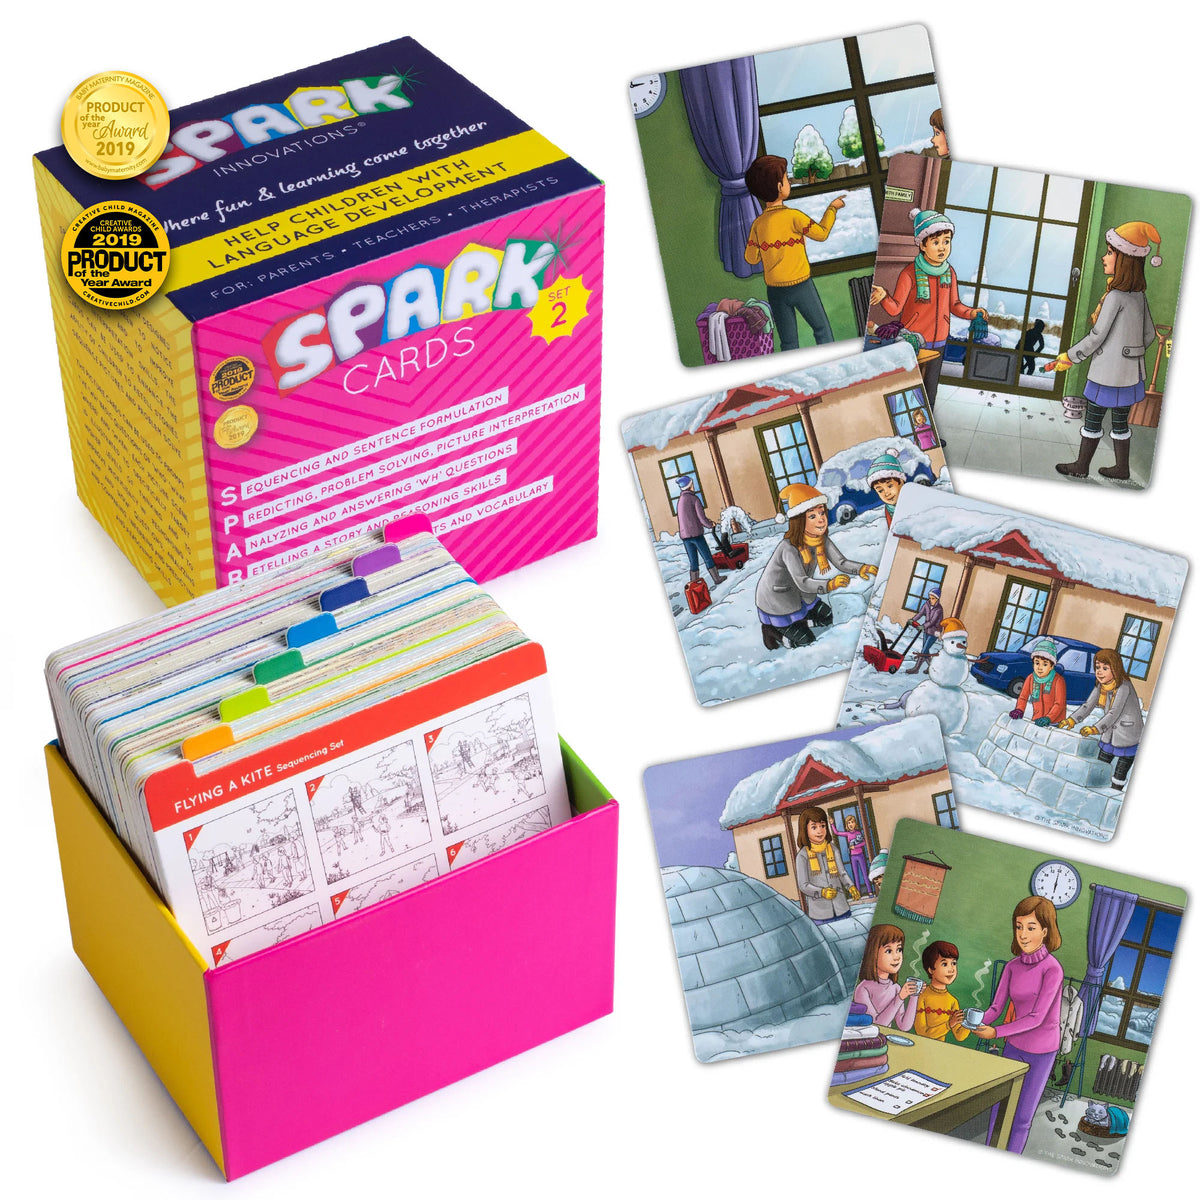 Spark Sequencing Cards - Set 2 – The Spark Innovations